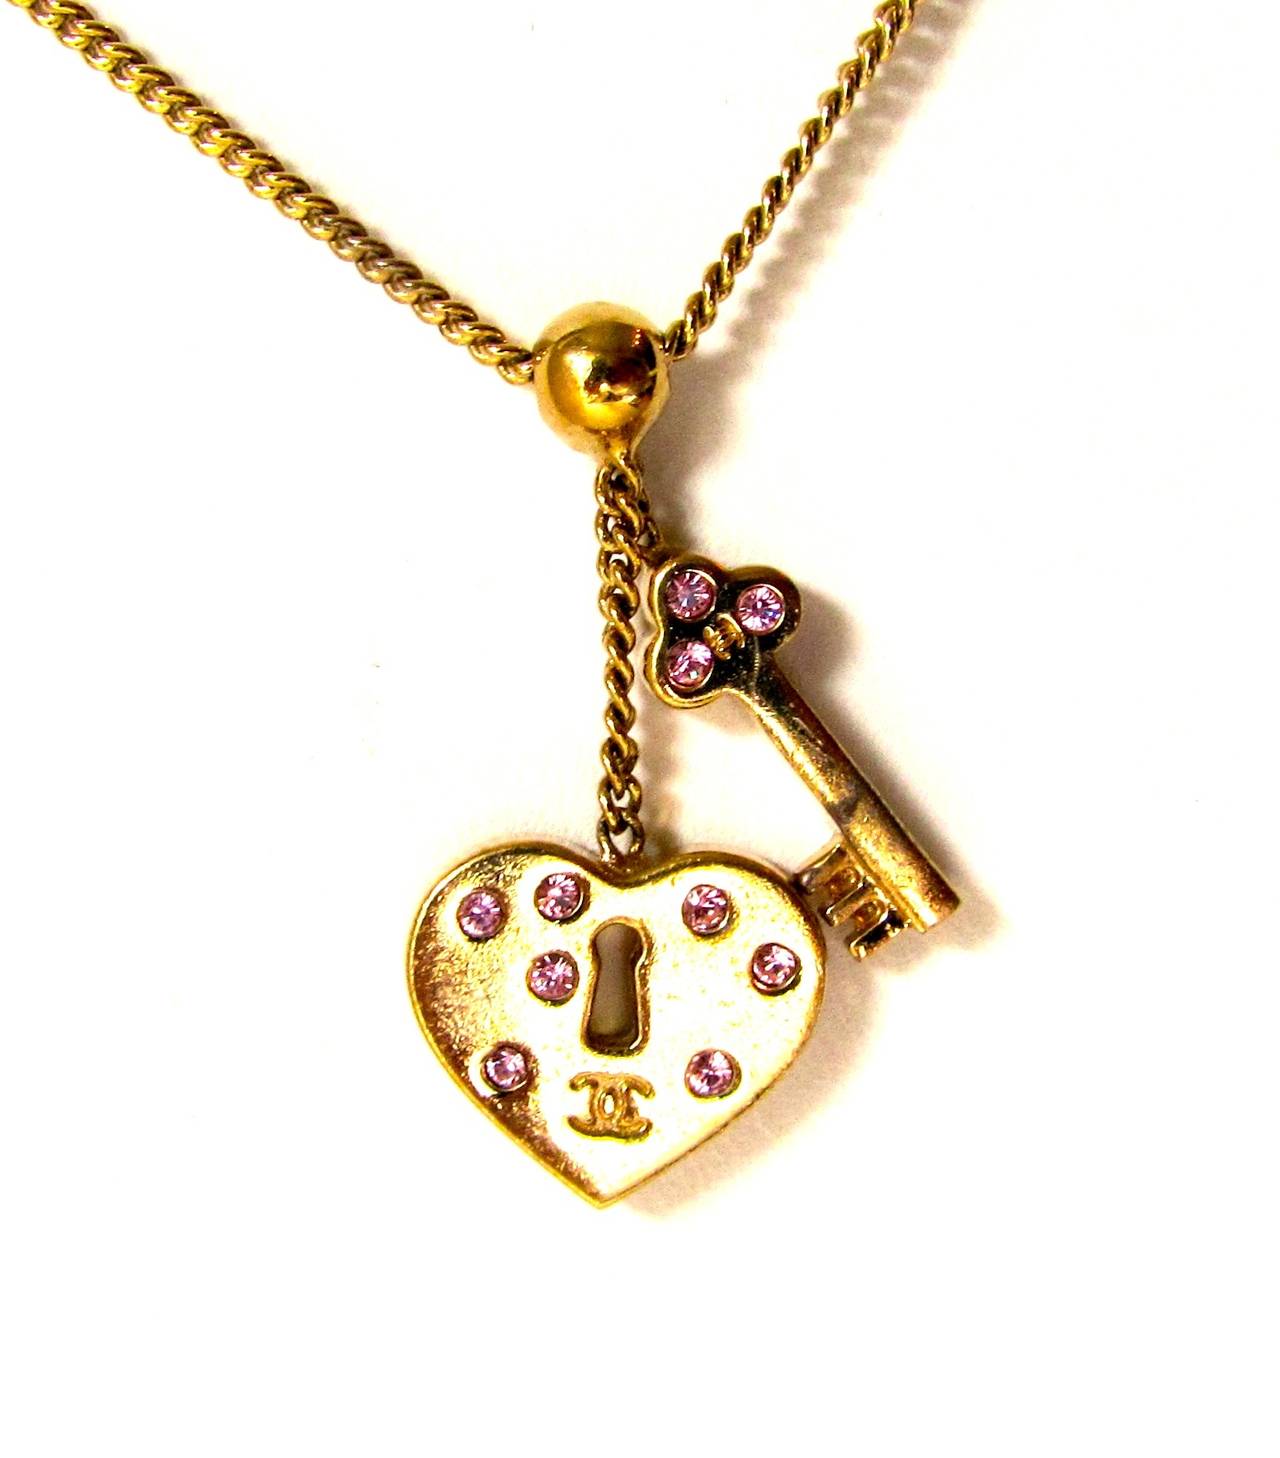 Beautiful Chanel necklace. Gold tone chain with two charms: A key and a heart charm with pink crystals encrusted to the surface on both sides of the charm. The heart also has the CC logo engraved upon the surface of the charm. Beautiful necklace